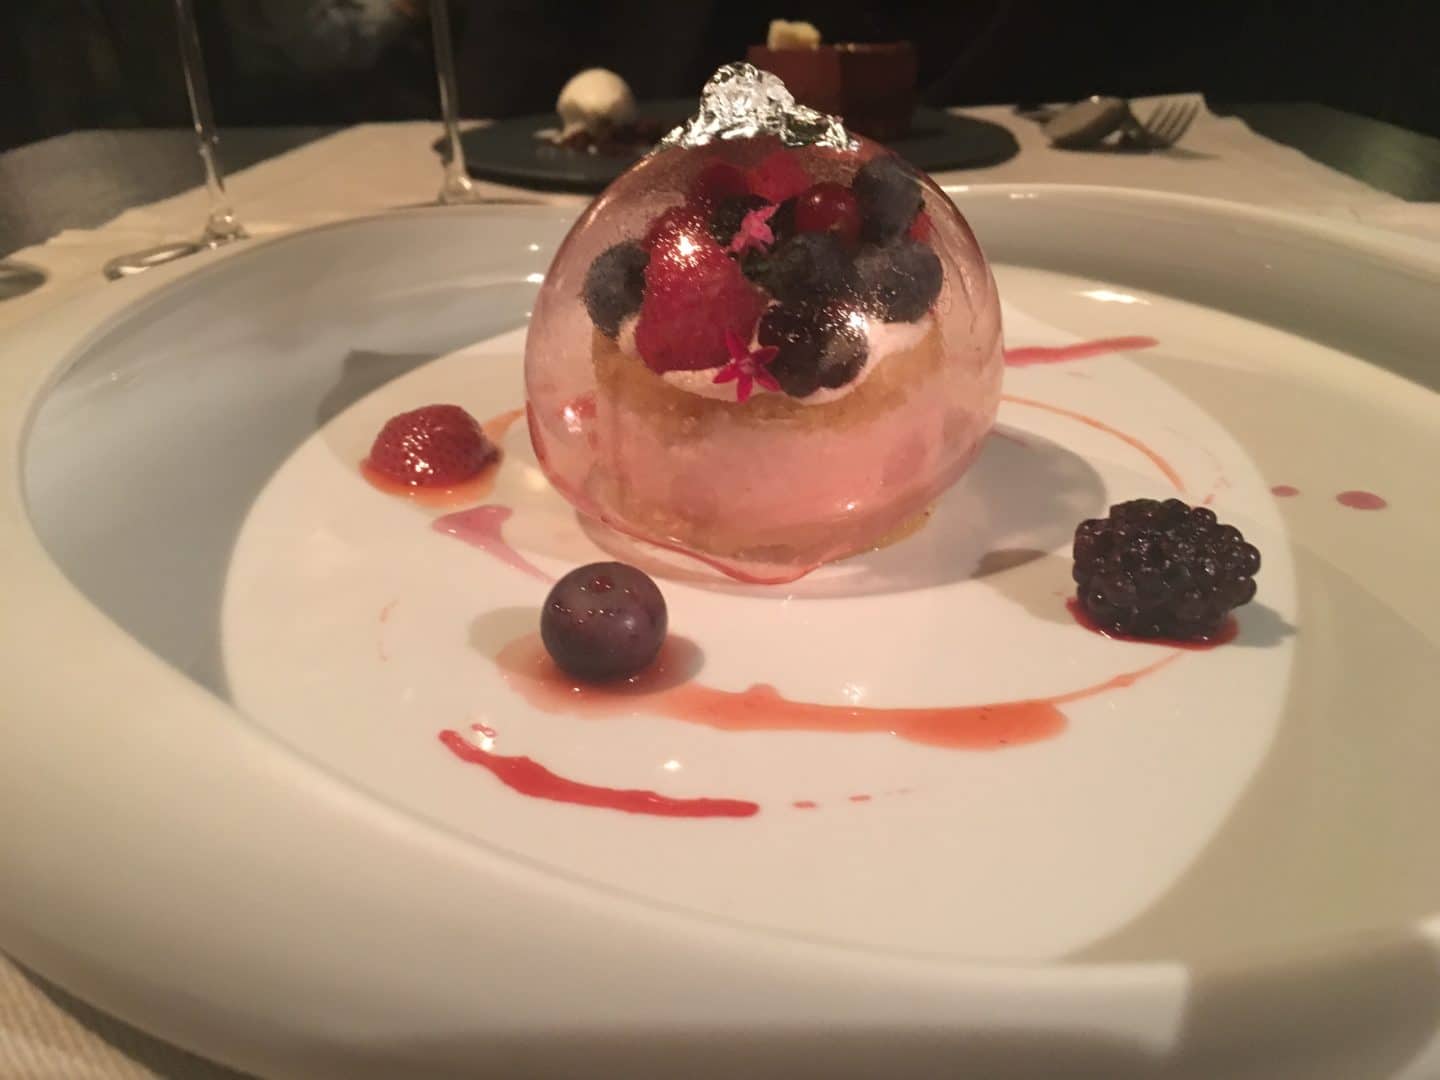 Locale Firenze Sugar encapsulated lime cake with blackberries and a berry jus, served on a bright white plate.